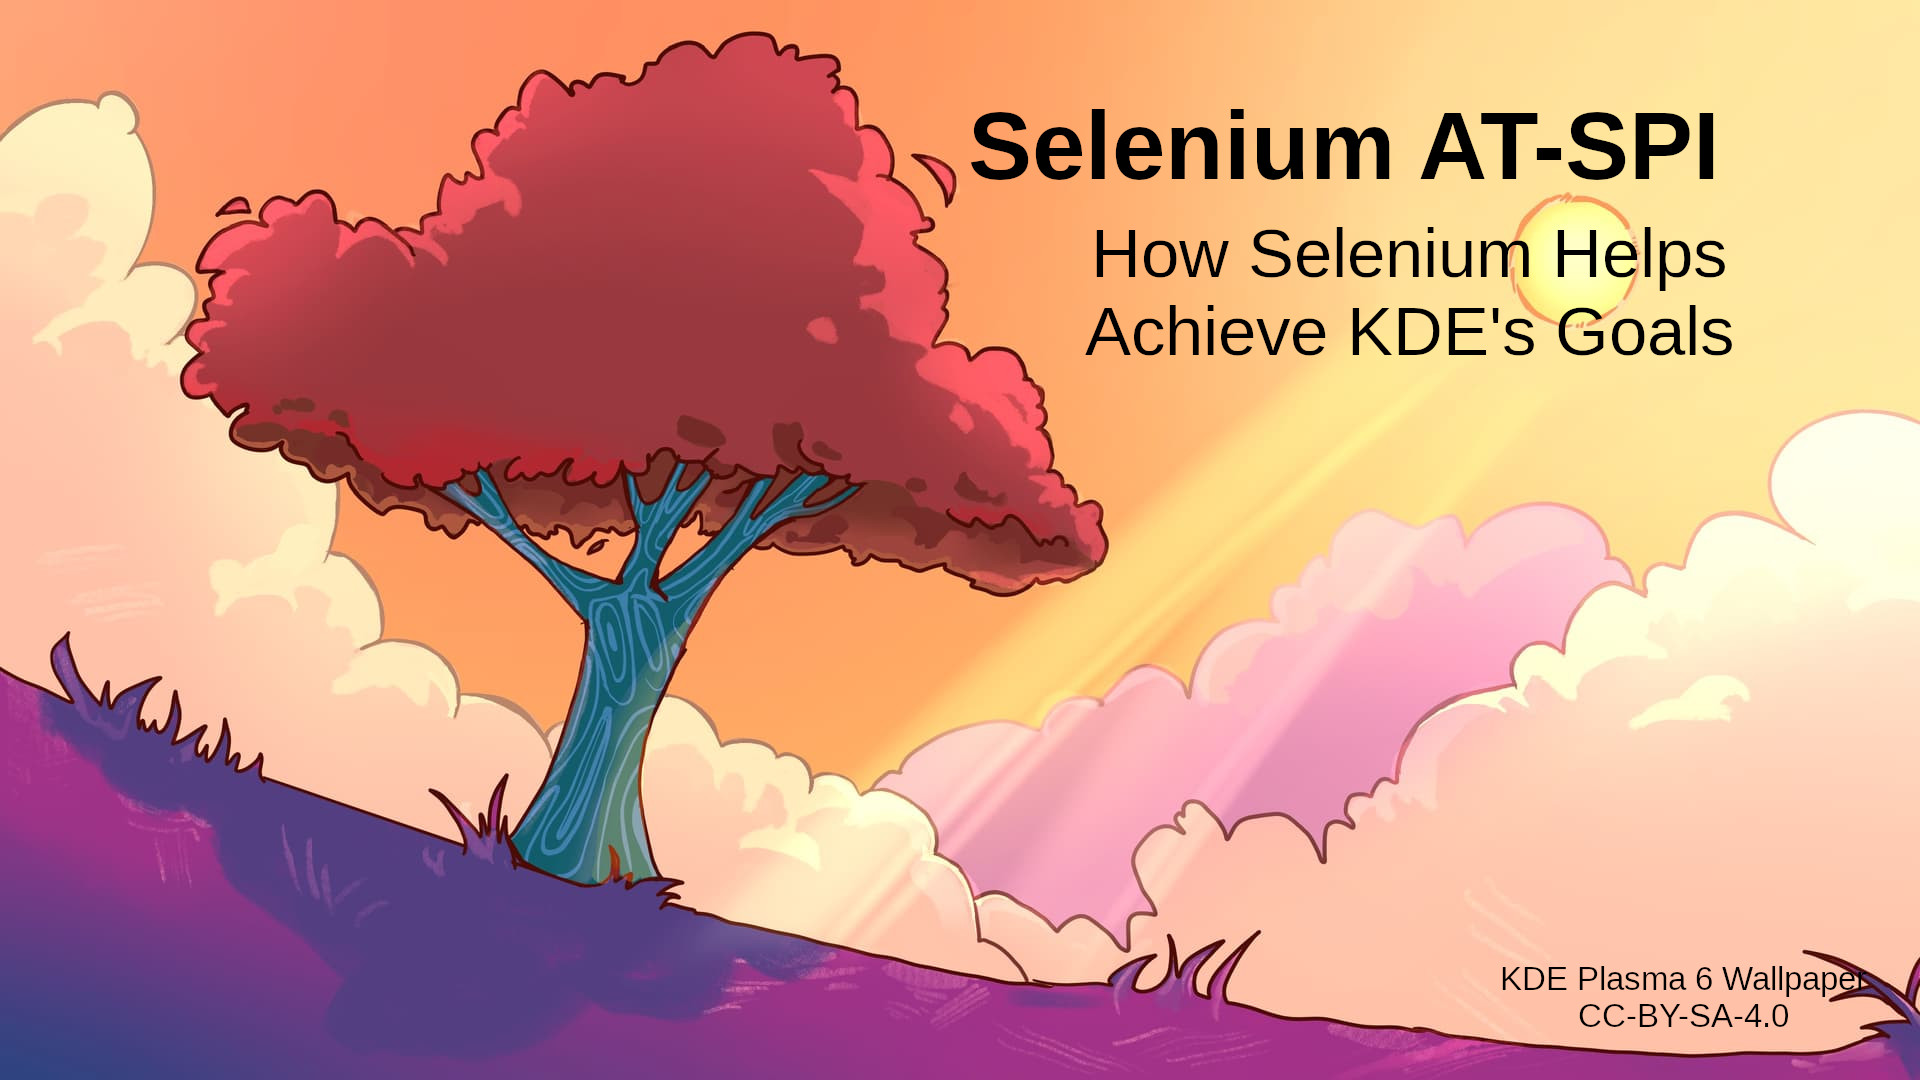 Video &quot;Selenium AT-SPI: How Selenium Helps Achieve KDE's Goals&quot; (screenshot from Pradyot Ranjan published under a <a href="https://spdx.org/licenses/CC-BY-4.0.html">CC-BY-4.0</a> license).